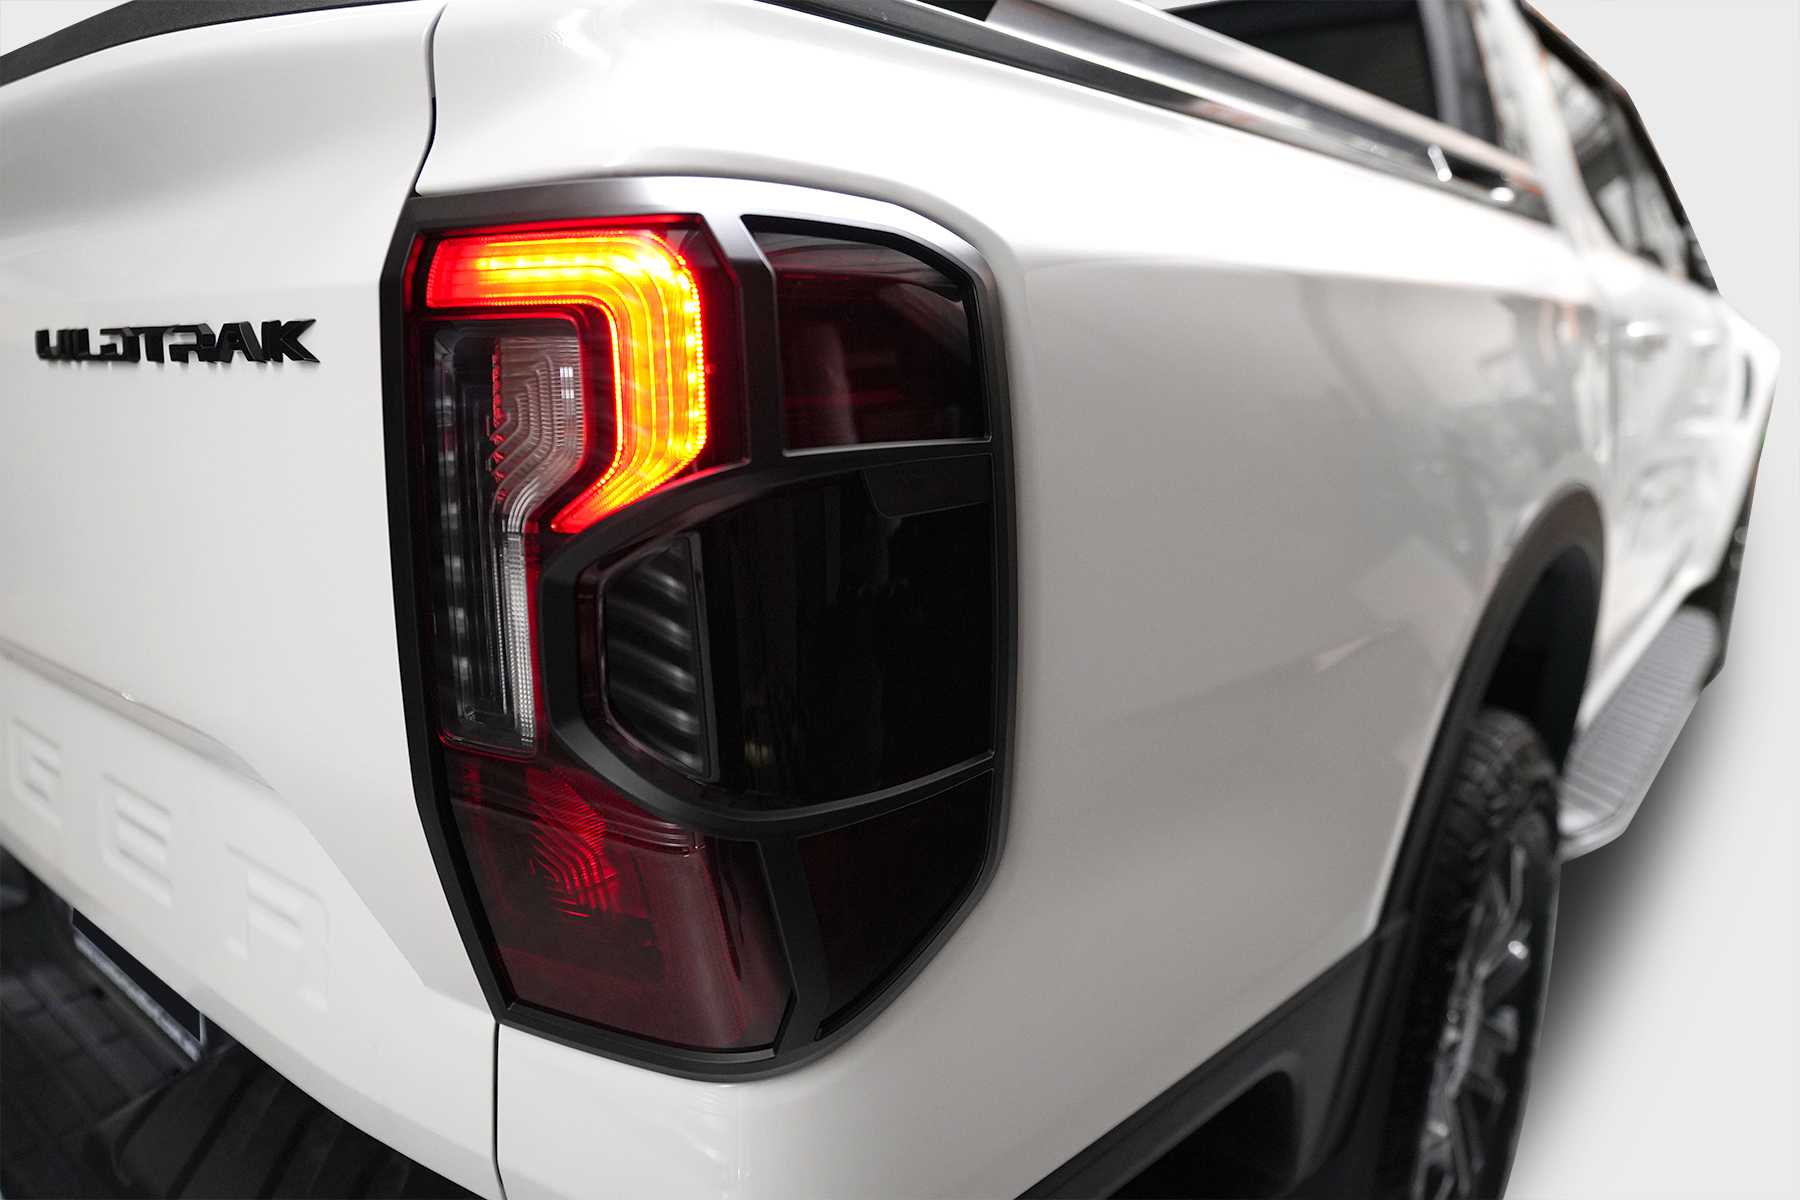 Taillight Cover Trim Guard For NEXT GEN Ford Ranger Wildtrak Sport 2022 2023 (Fits: Ford Ranger)Opens in a new window or tab Brand new